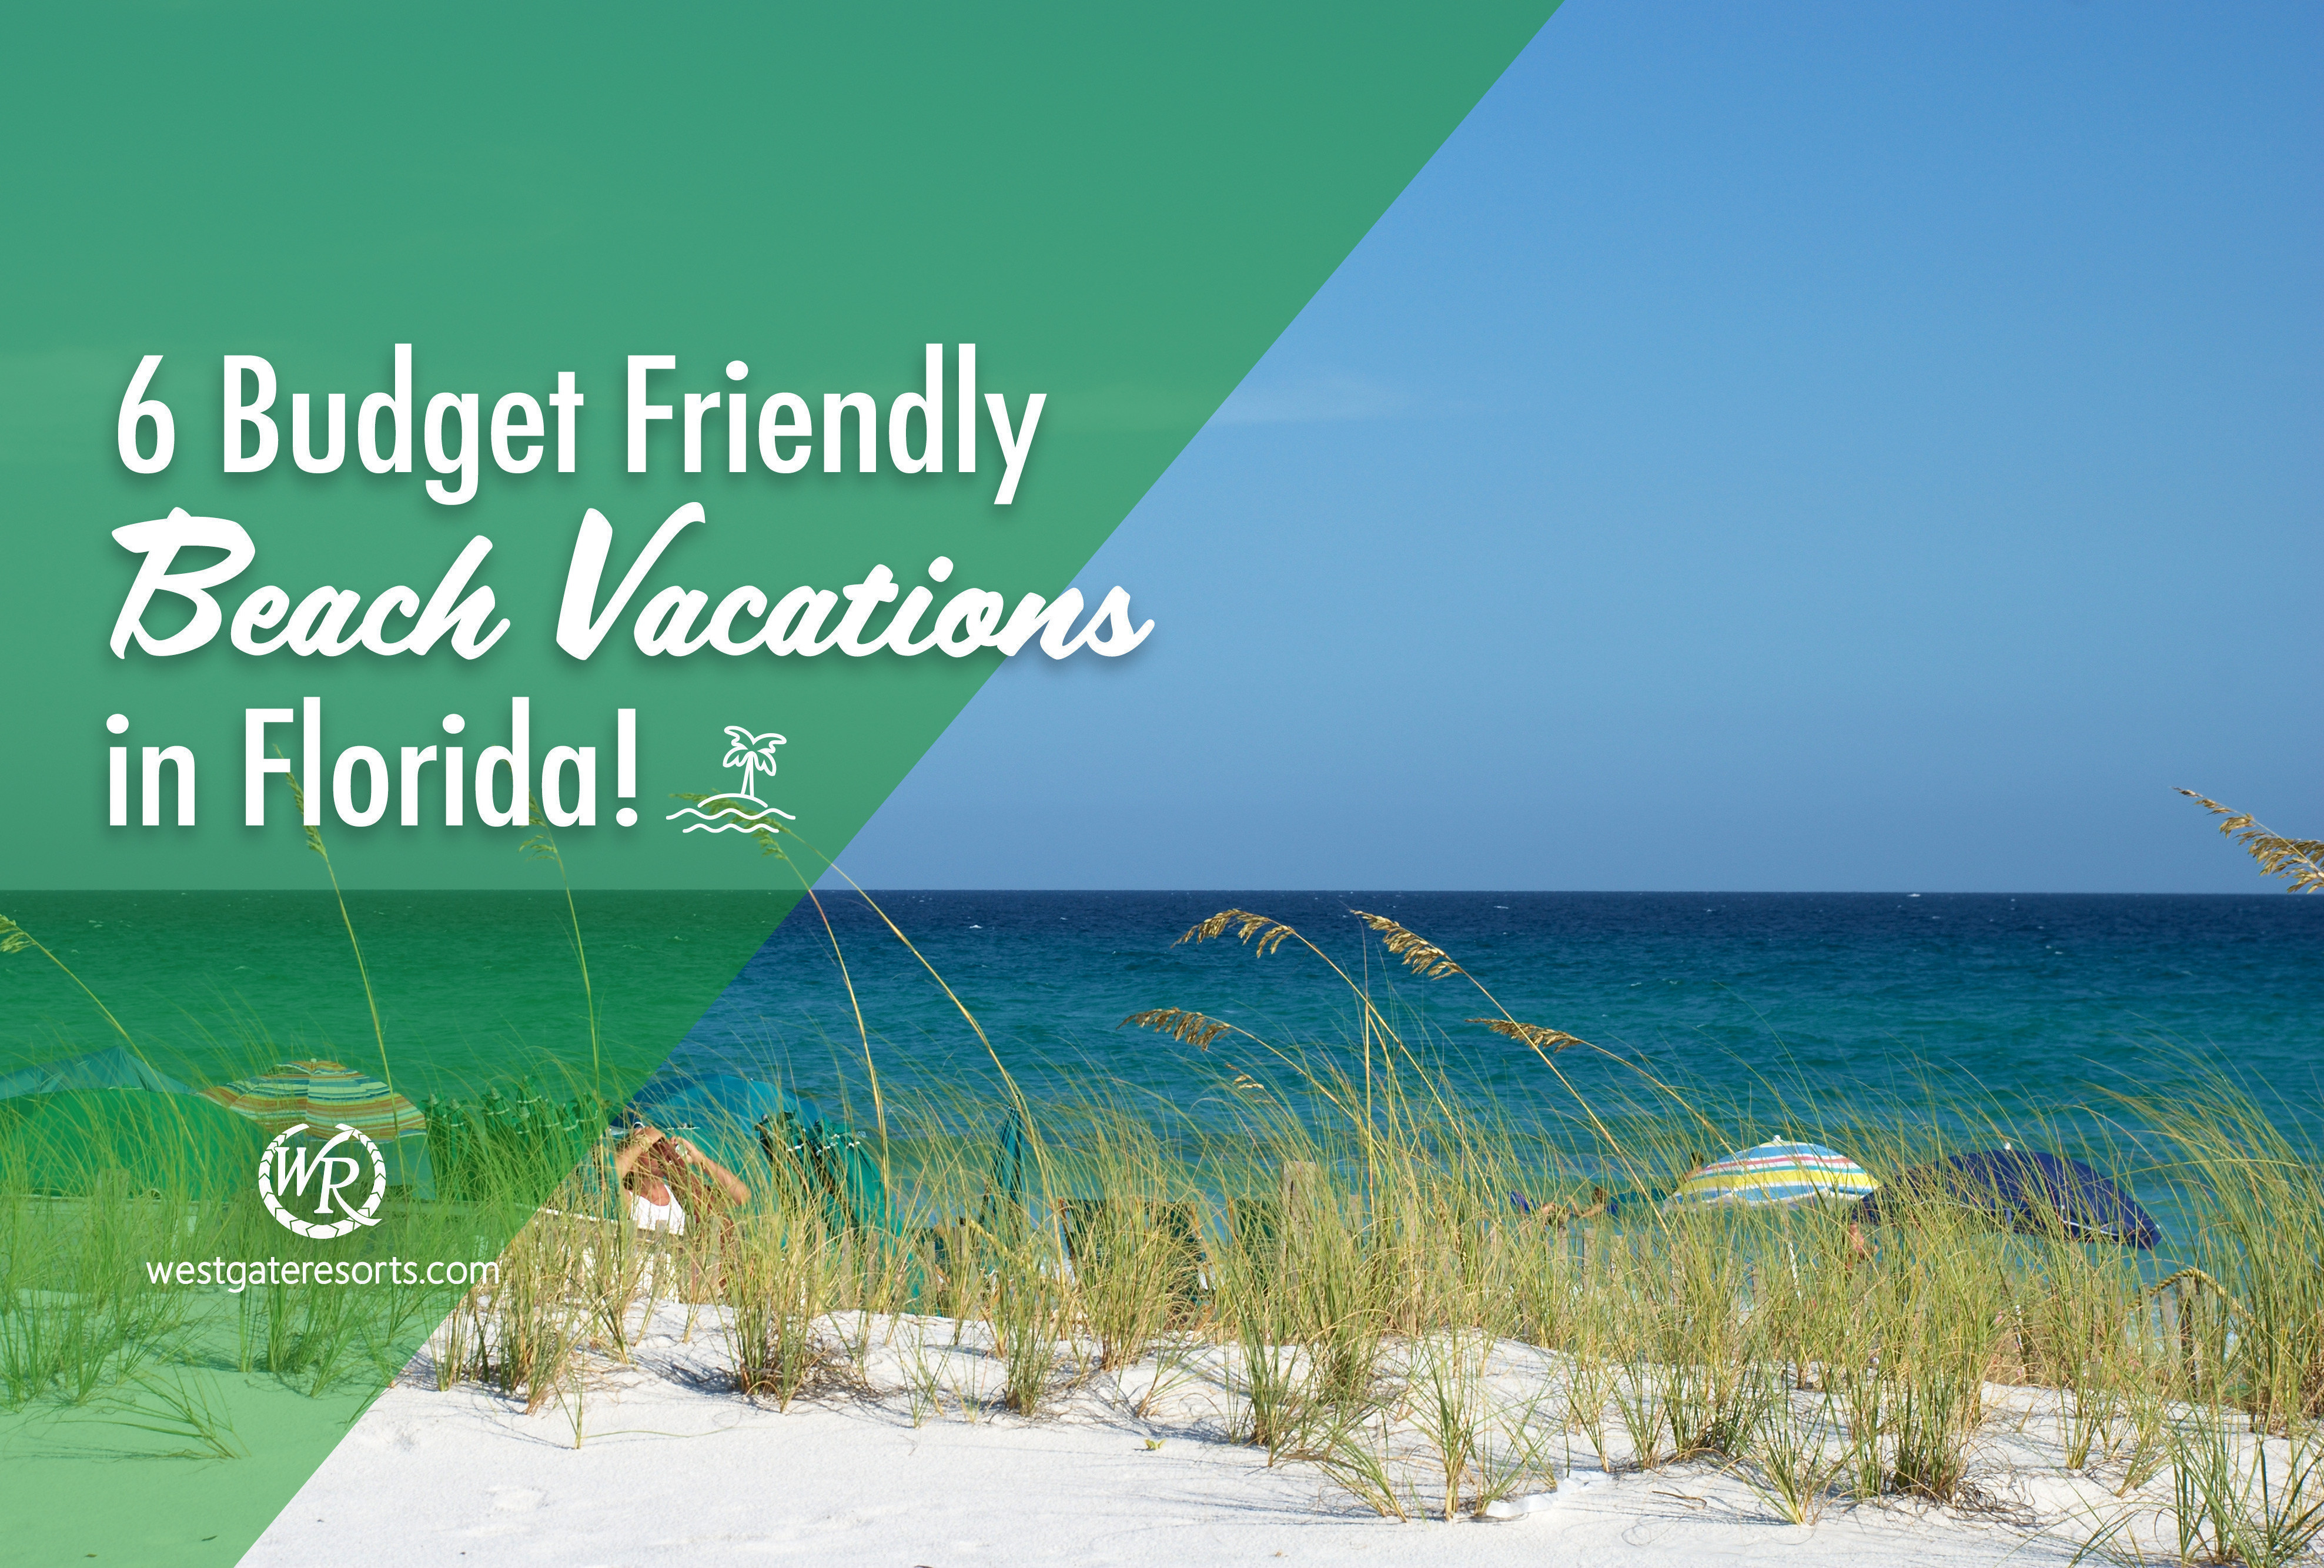 13 Budget Friendly Beach Vacations in Florida!